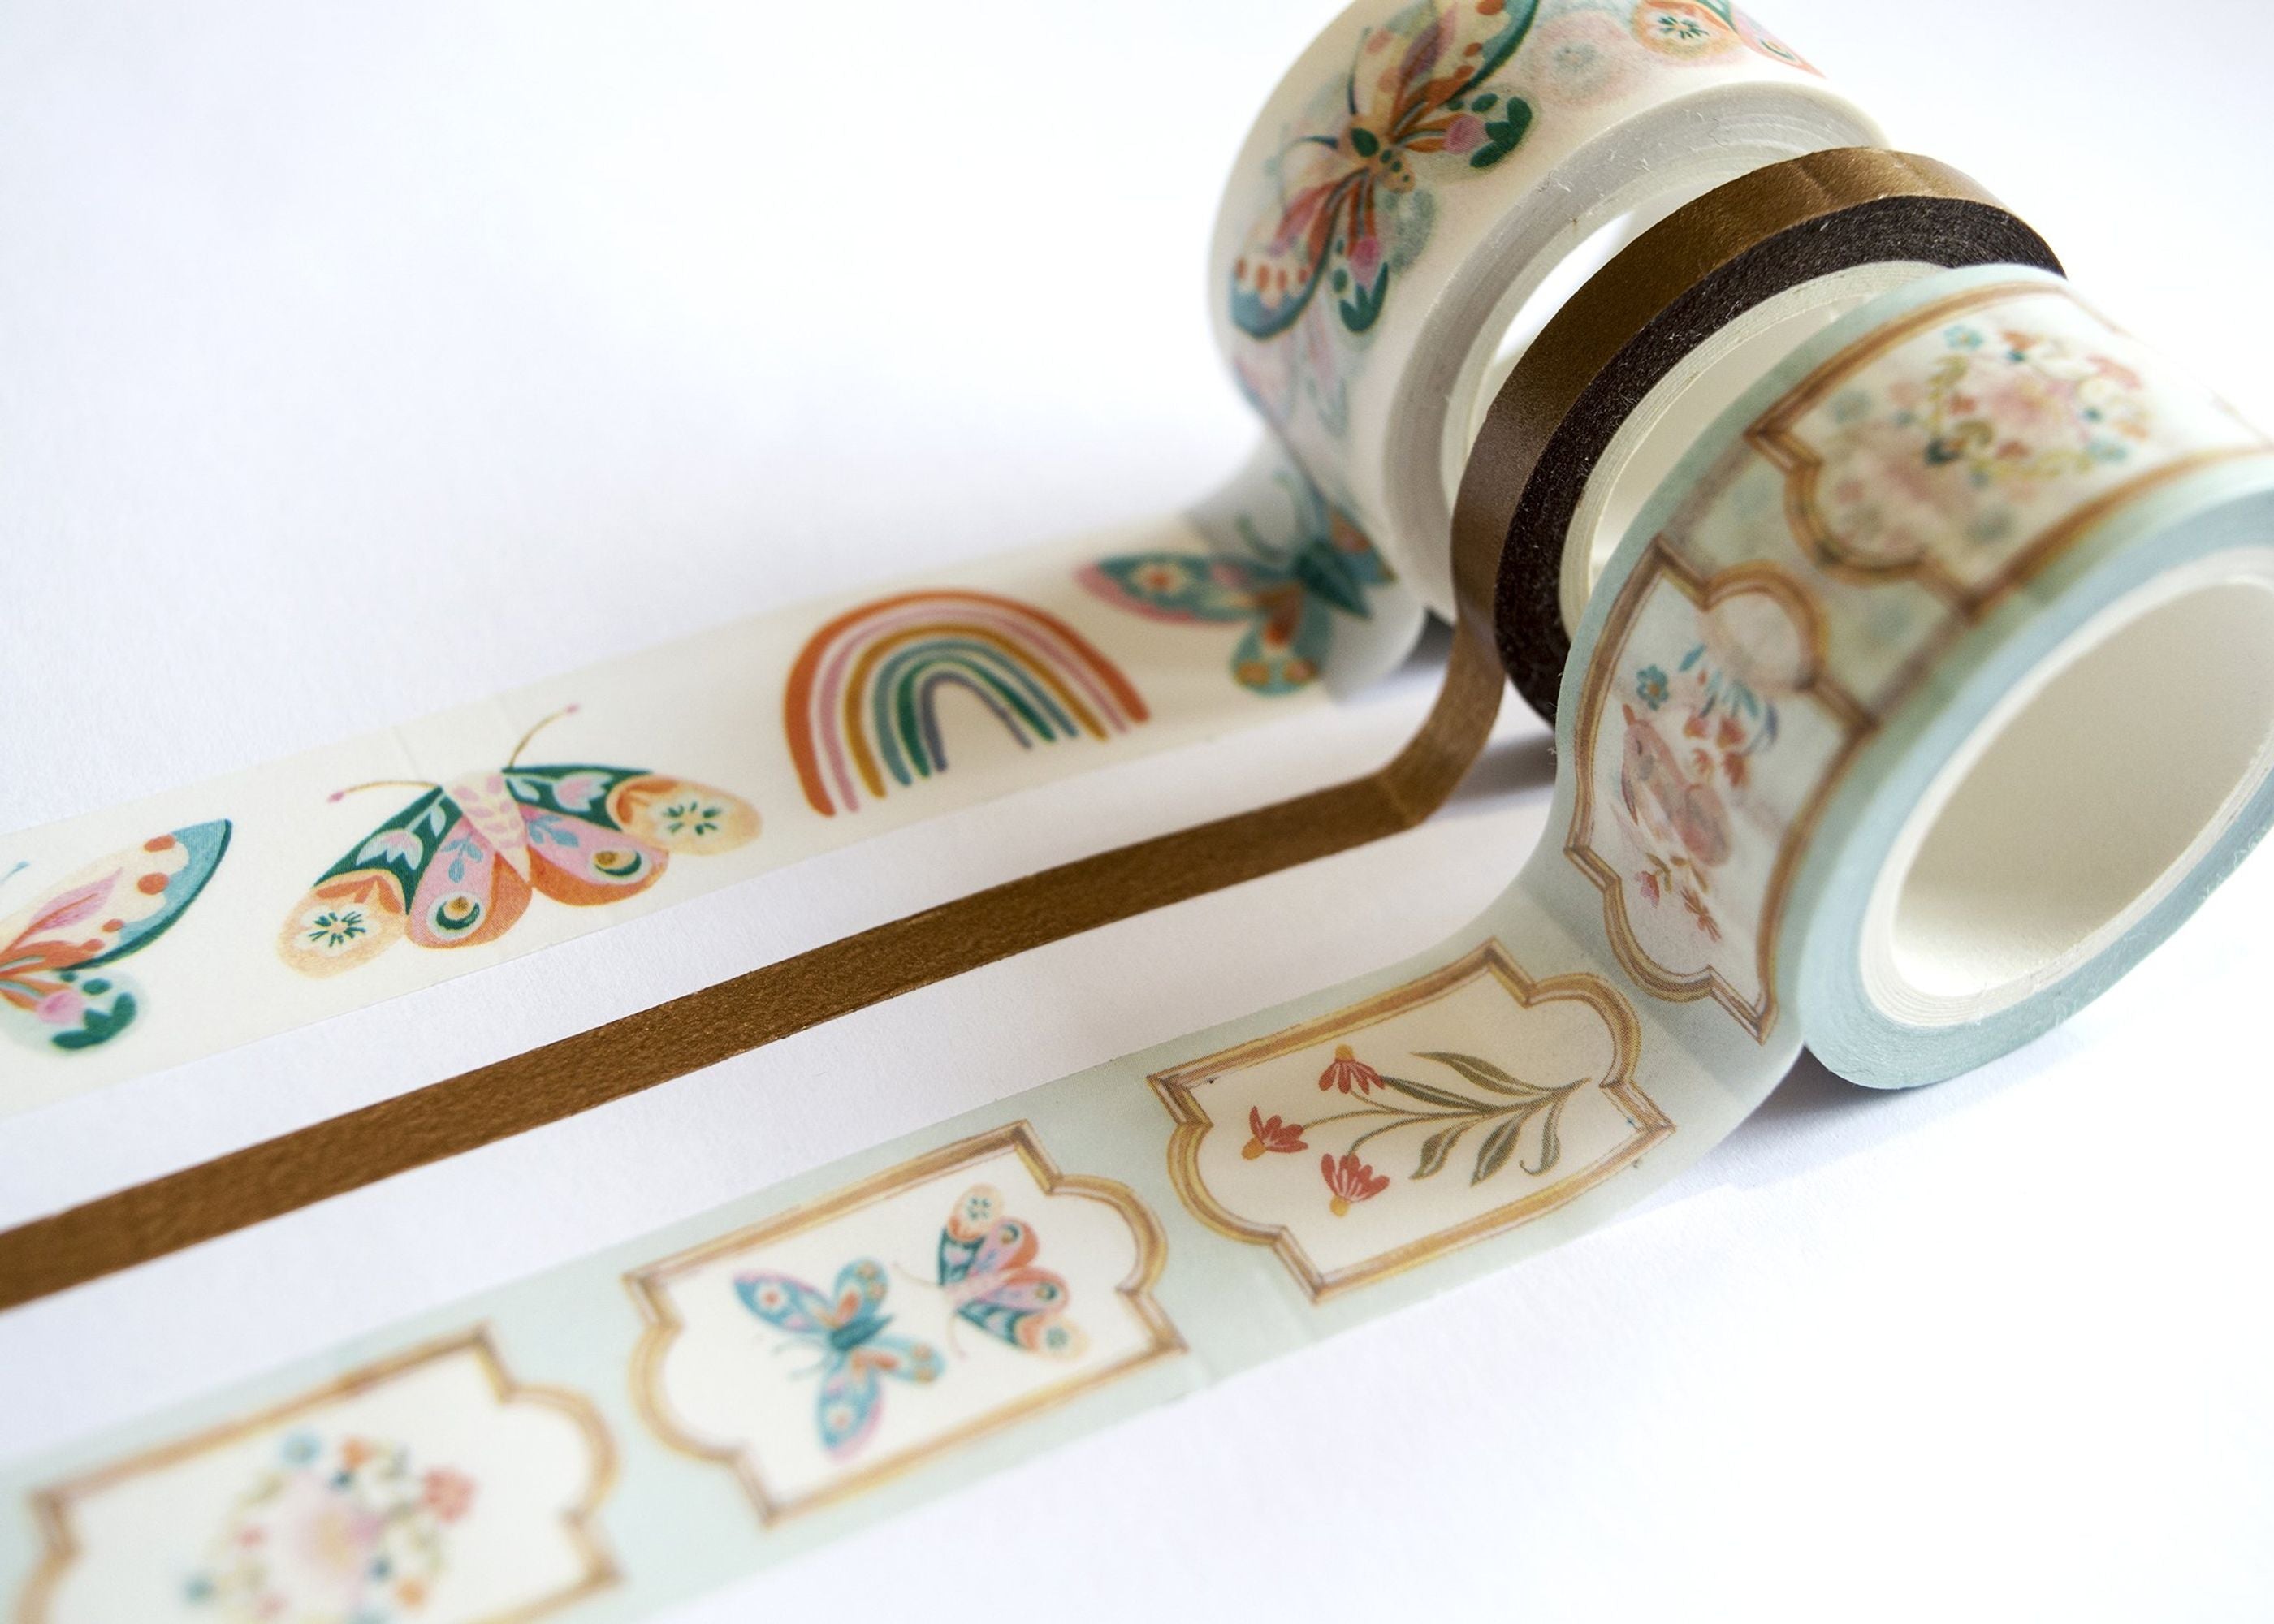 Aall and Create Washi Tape #12 - Horticultural Layers